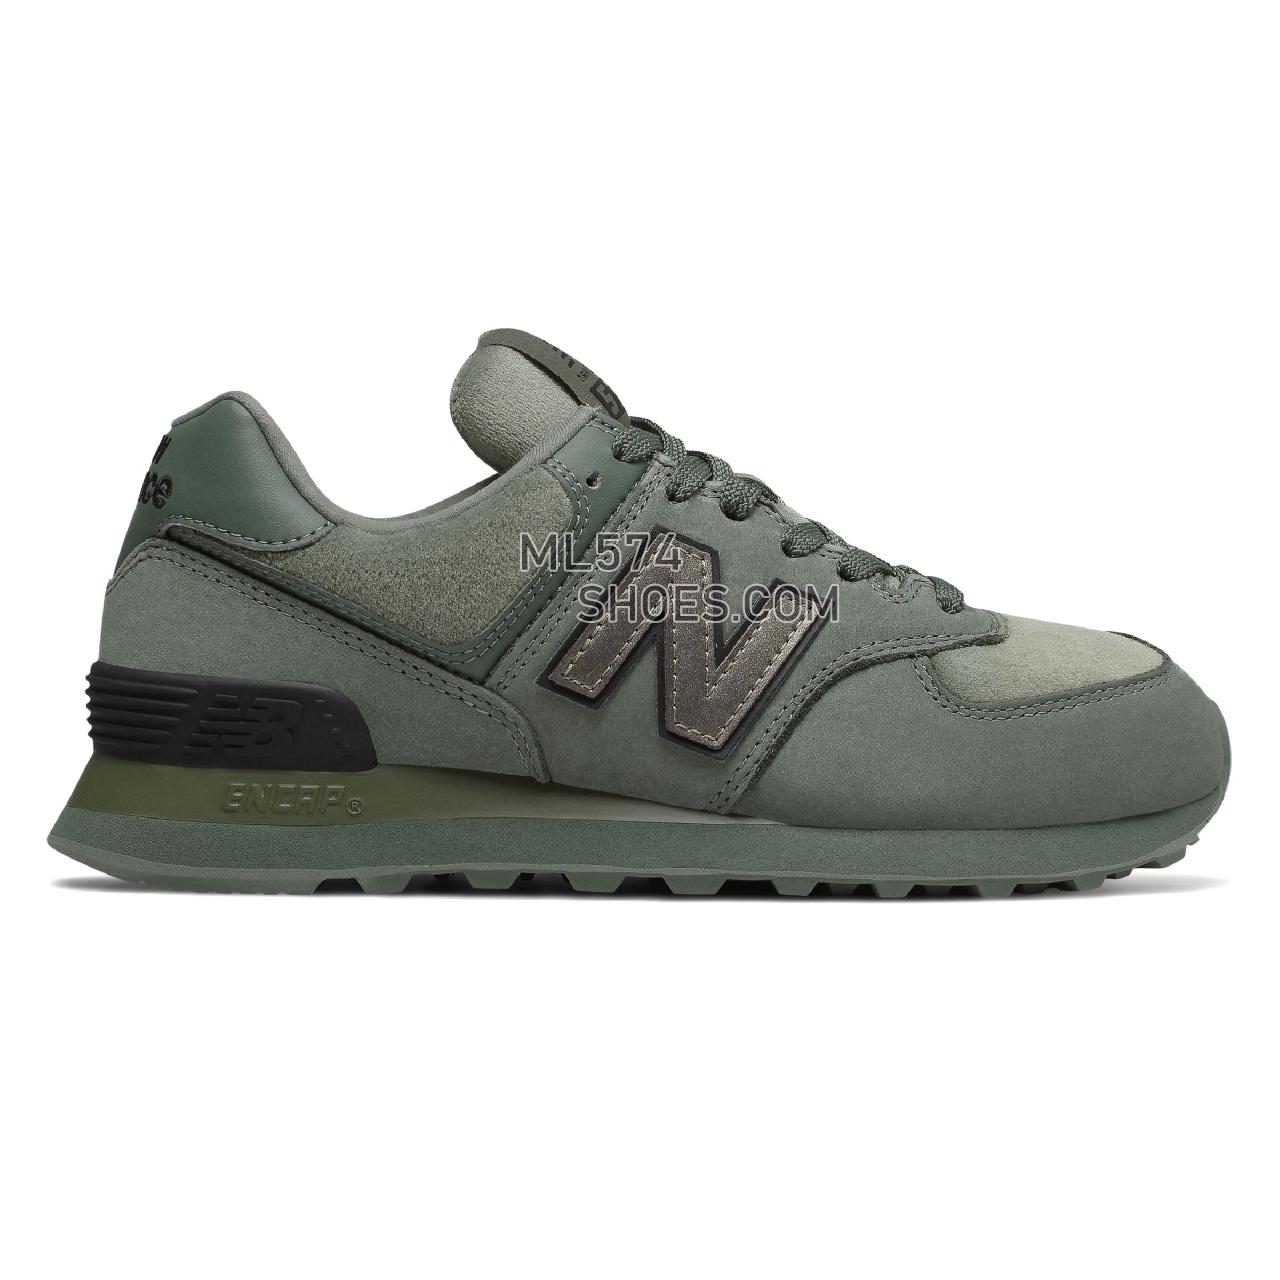 New Balance 574 - Women's Classic Sneakers - Slate Green with Black - WL574LDH